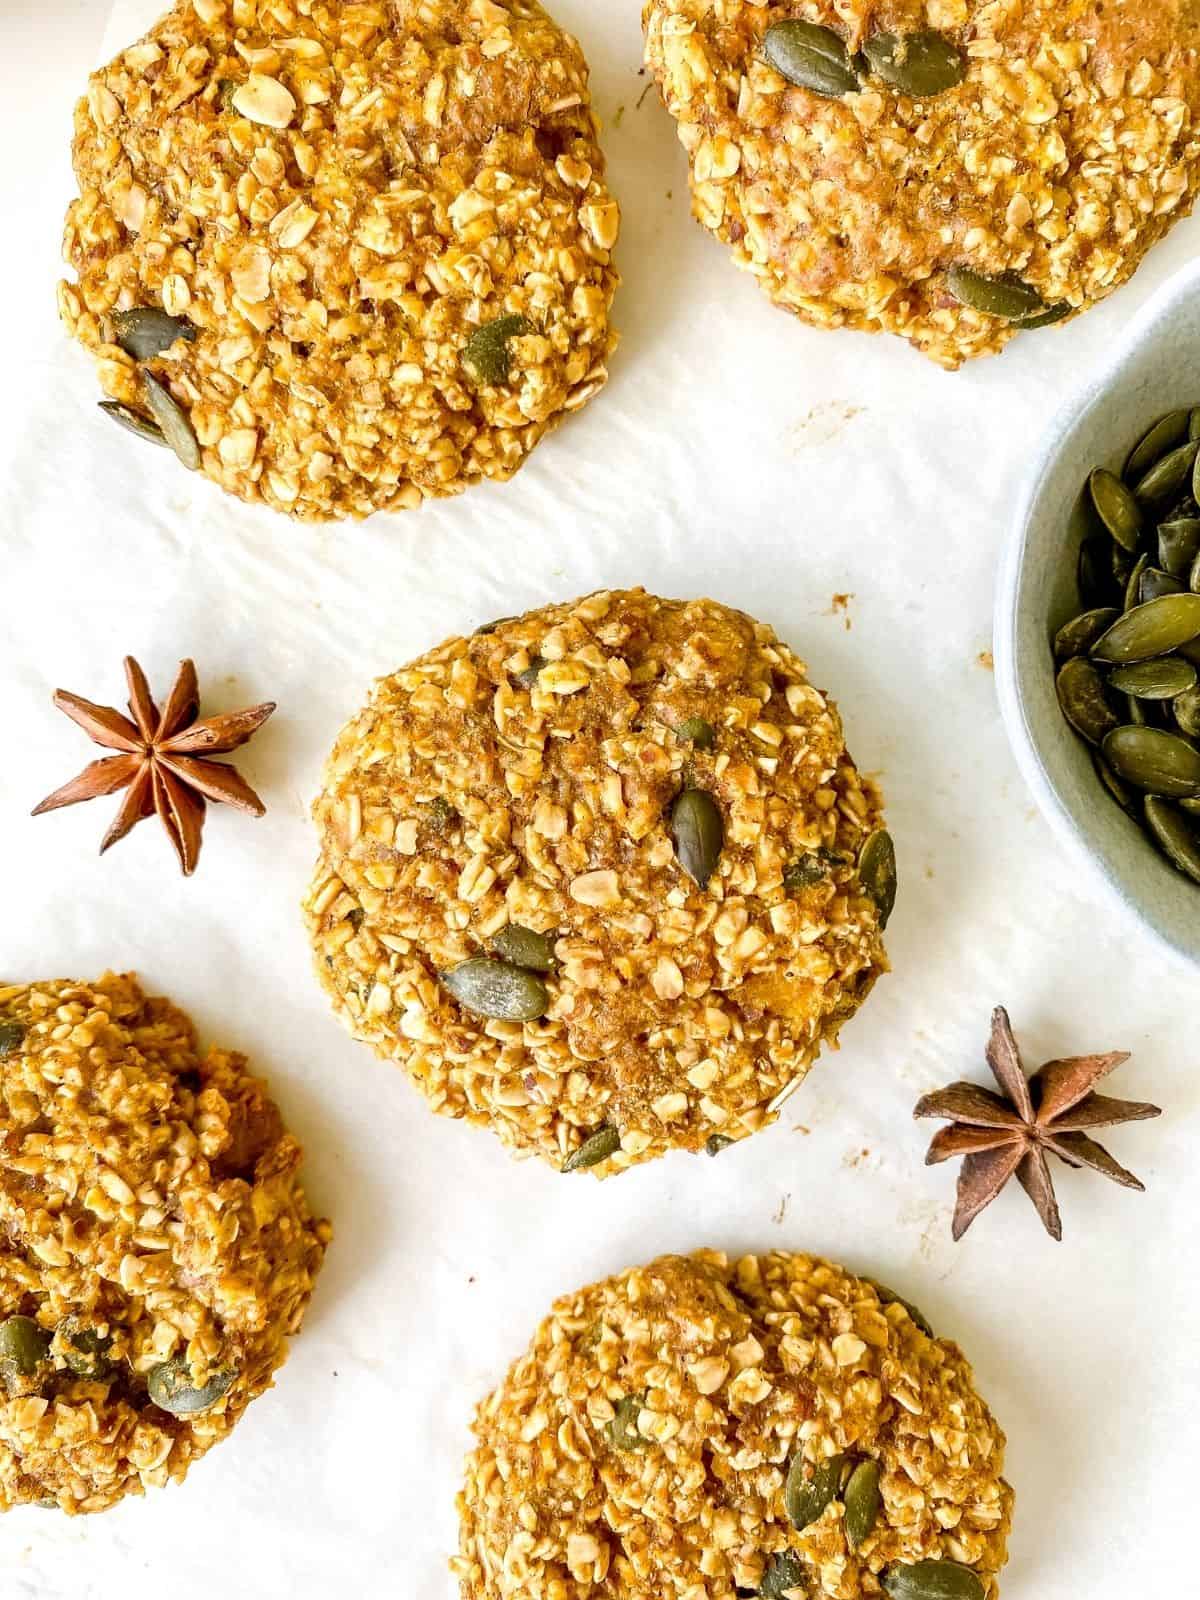 vegan pumpkin spice oatmeal cookies on a white background with star anise and pumpkin seeds next to them.